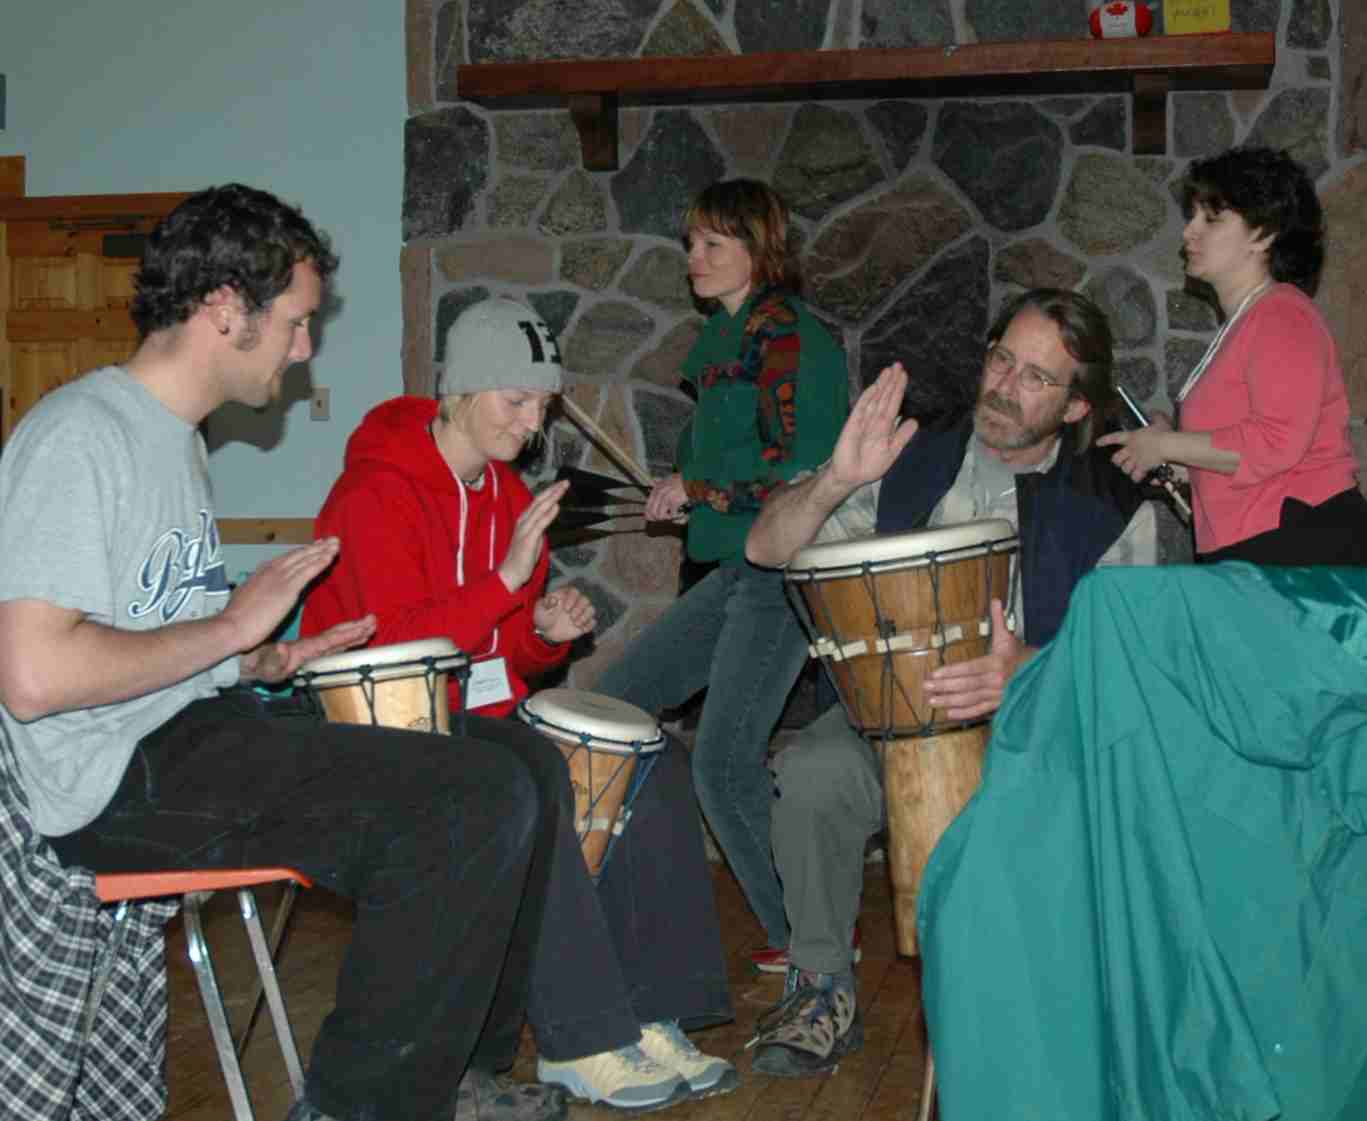 A drumming circle in the planning phase!